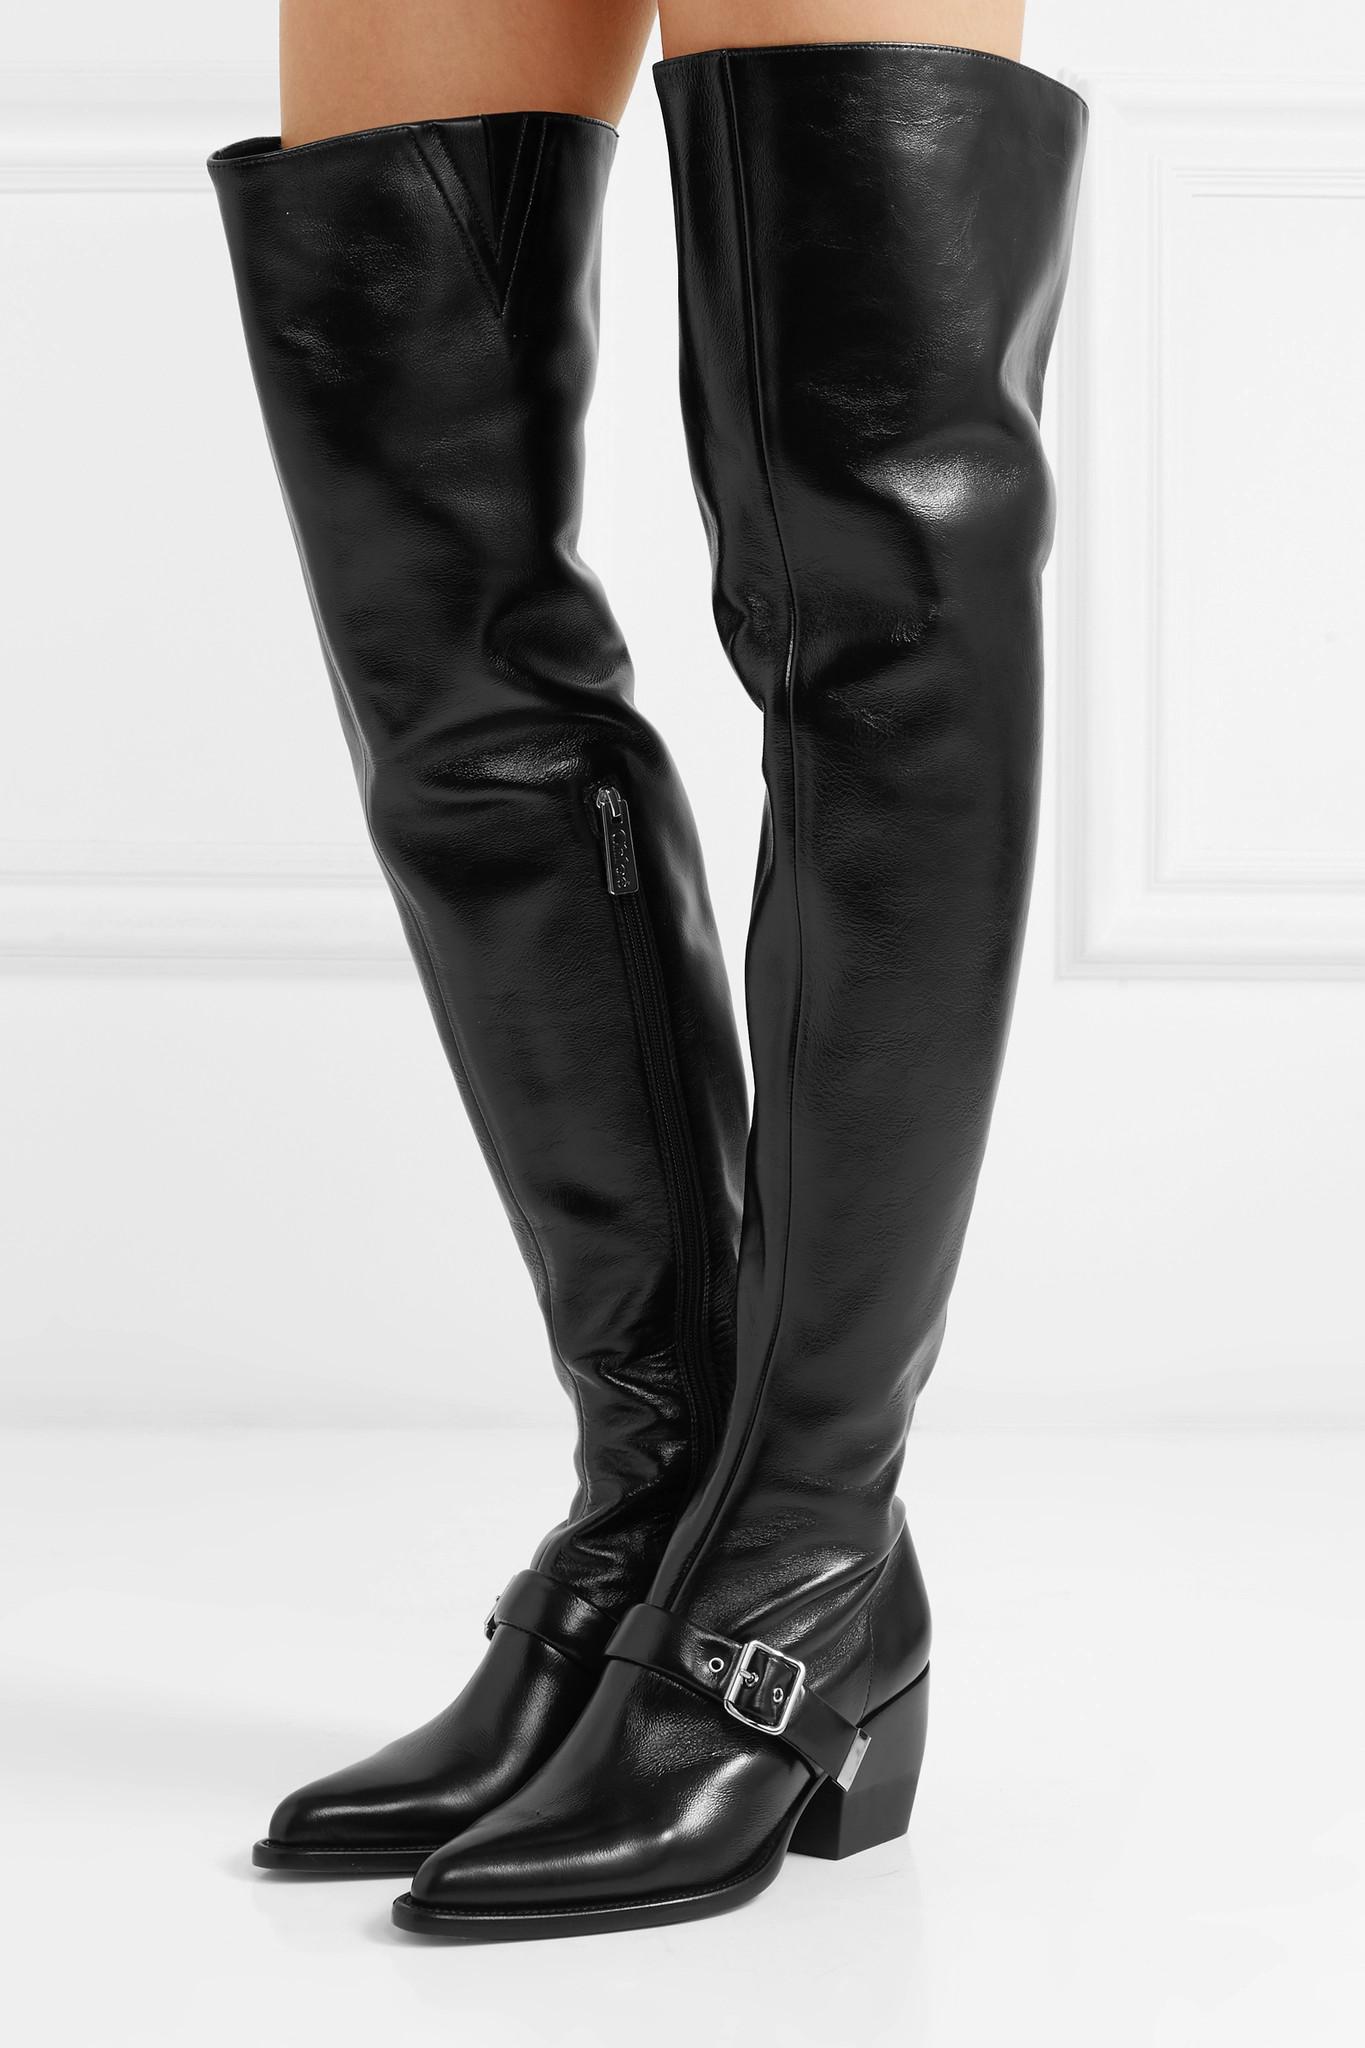 Chloé Rylee Leather Over-the-knee Boots in Black | Lyst